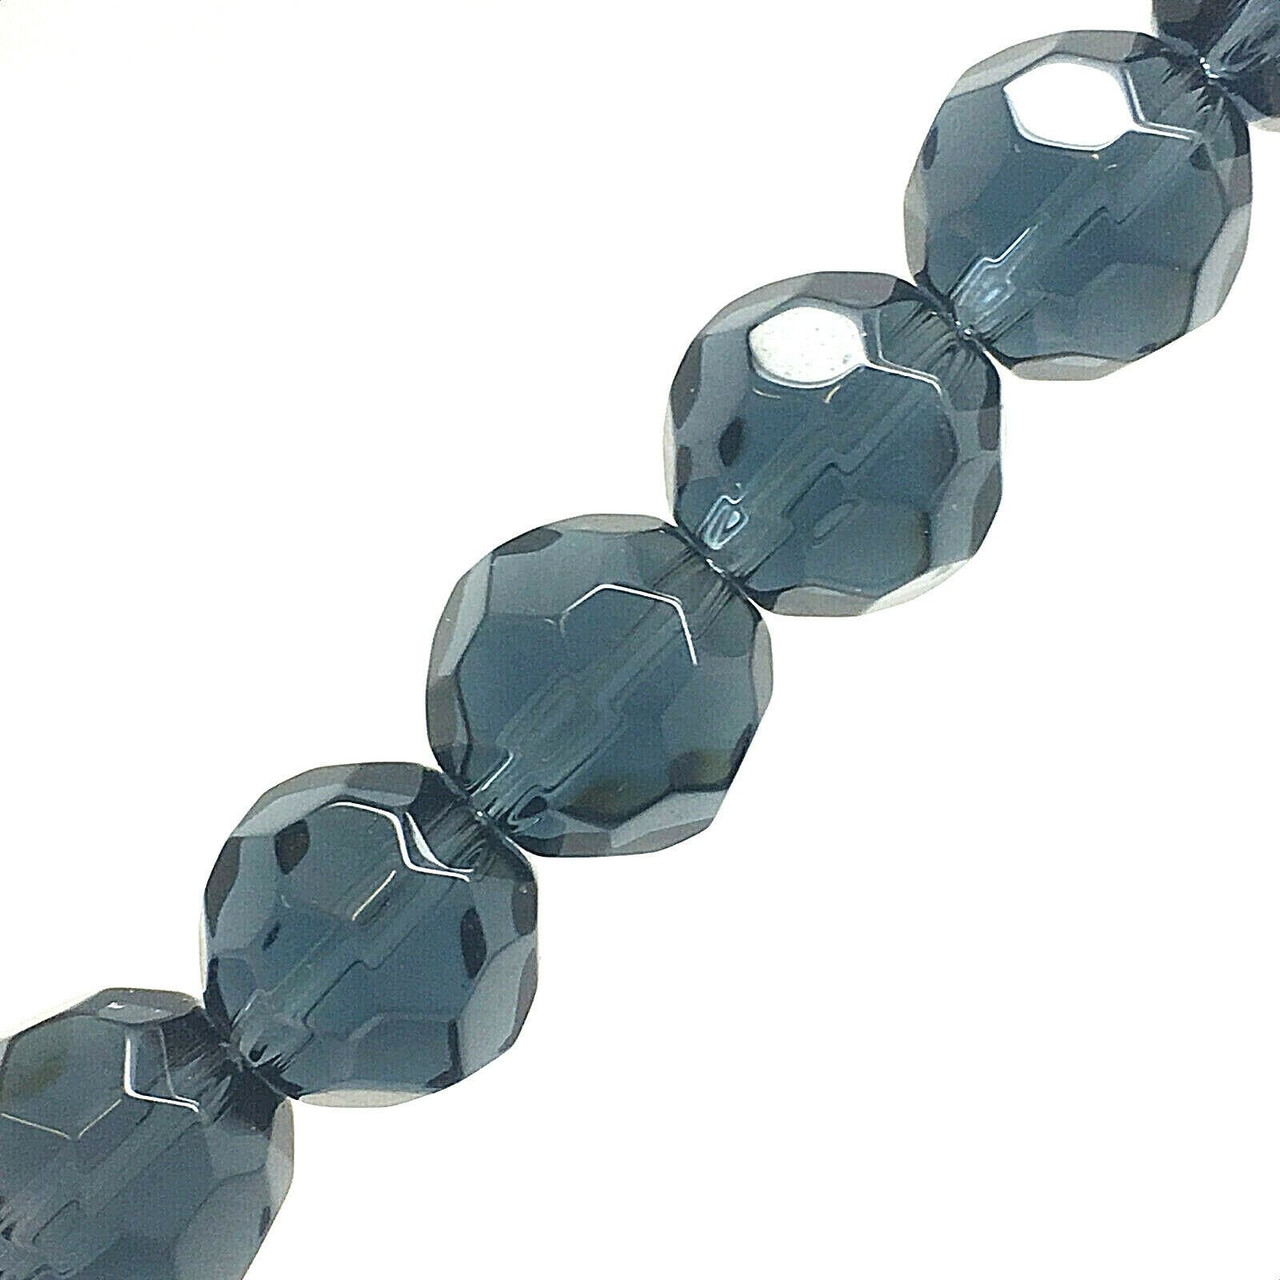 Strand of faceted round glass beads - approx 6mm, Grey, approx 50 beads, 12in